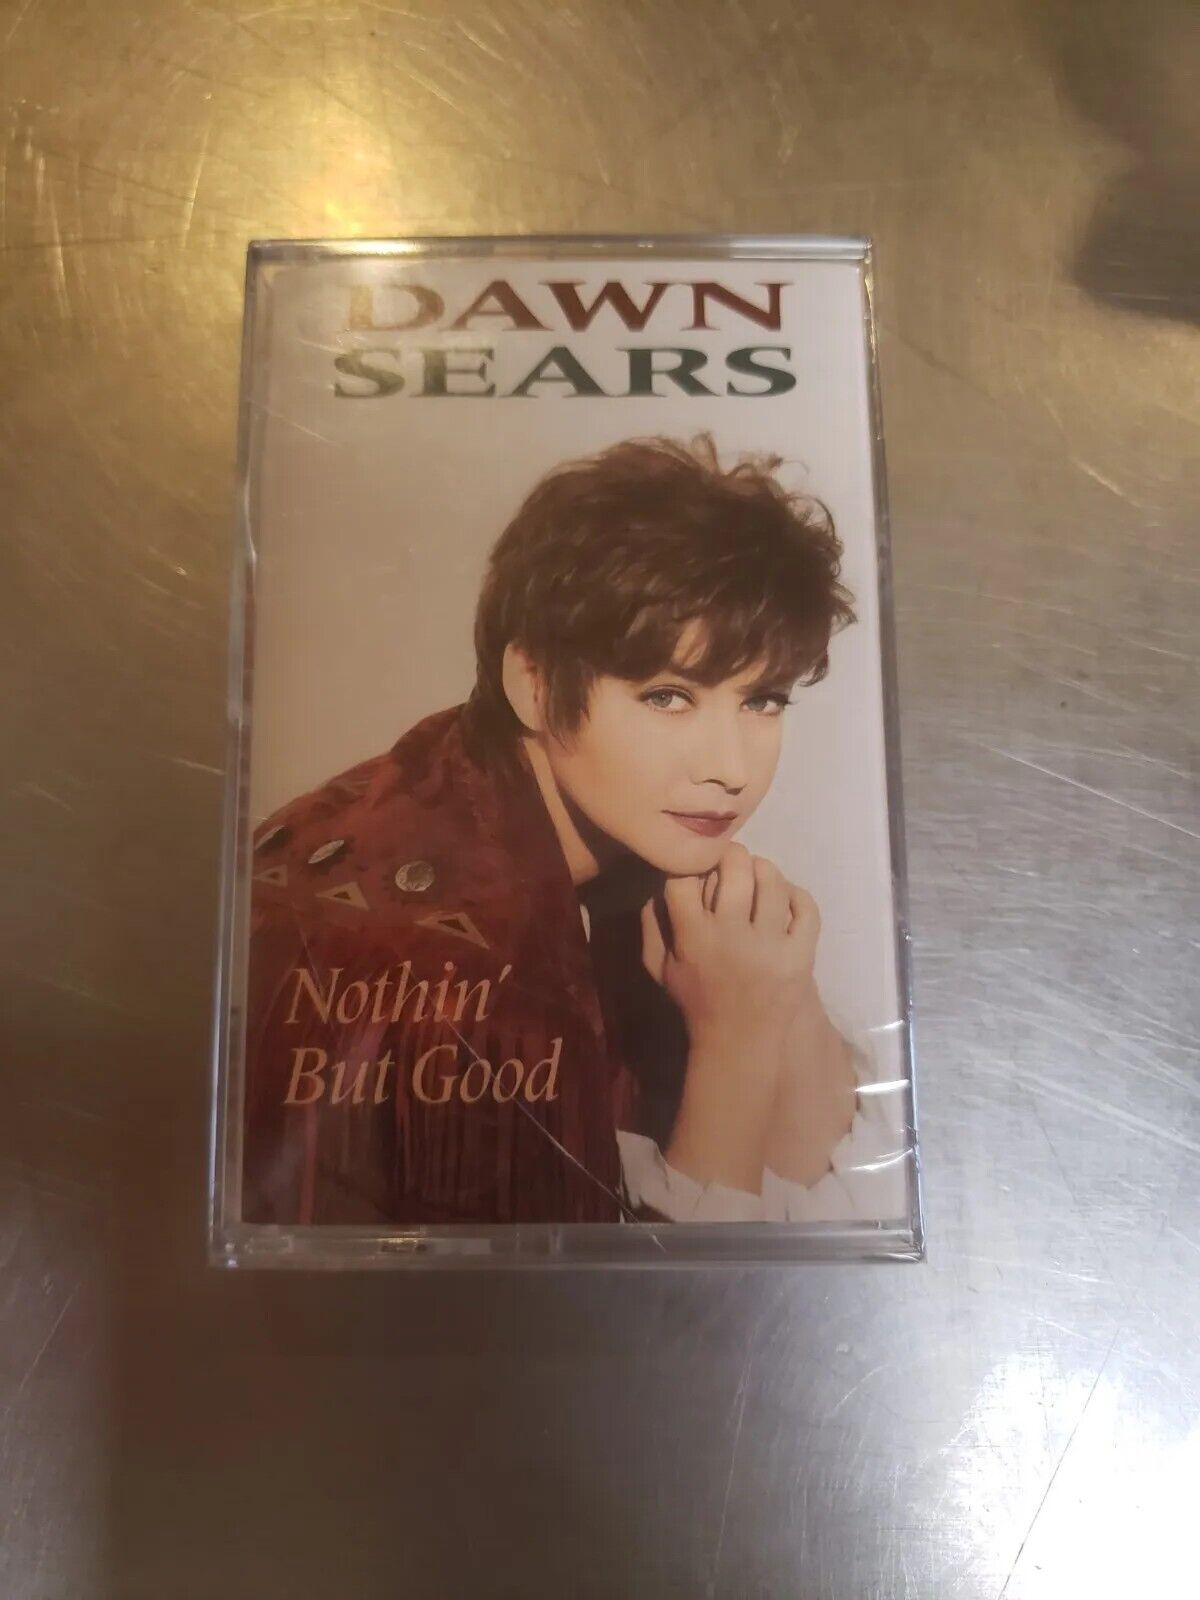 Dawn Sears - Nothin  But Good - Cassette New Sealed Vintage